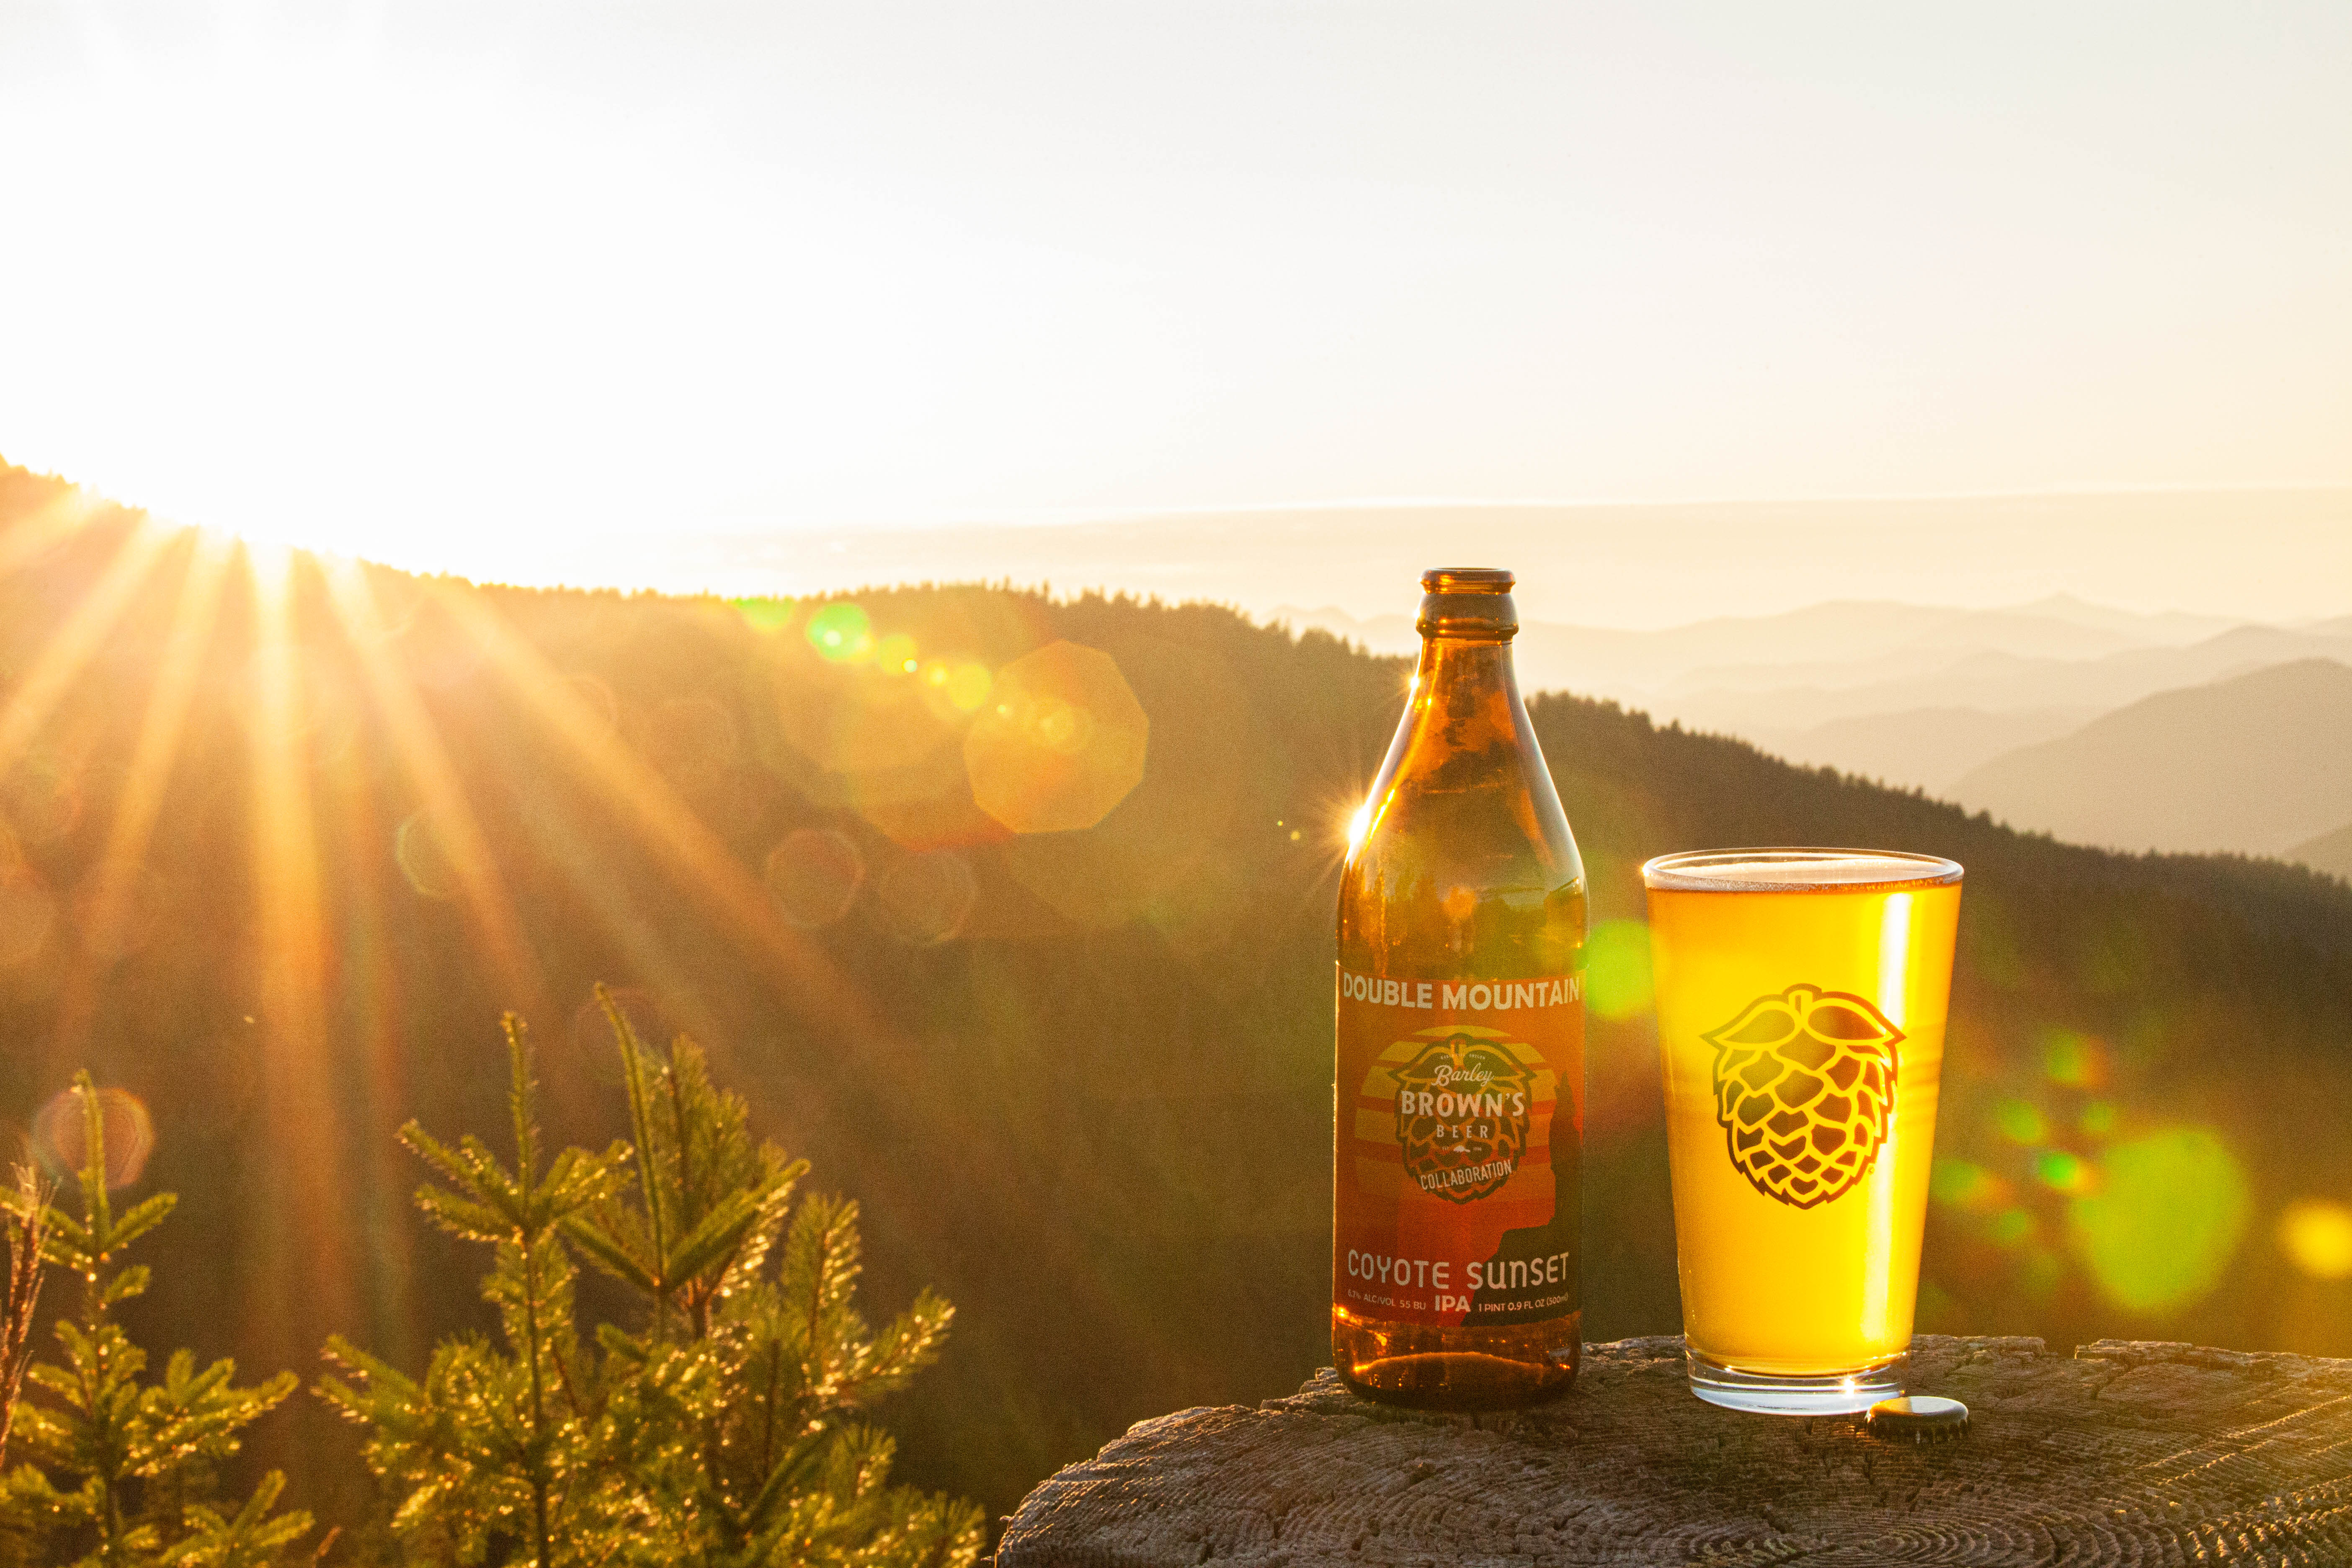 image of Double Mountain Brewery & Barley Brown's Beer Coyote Sunset IPA courtesy of Double Mountain Brewery